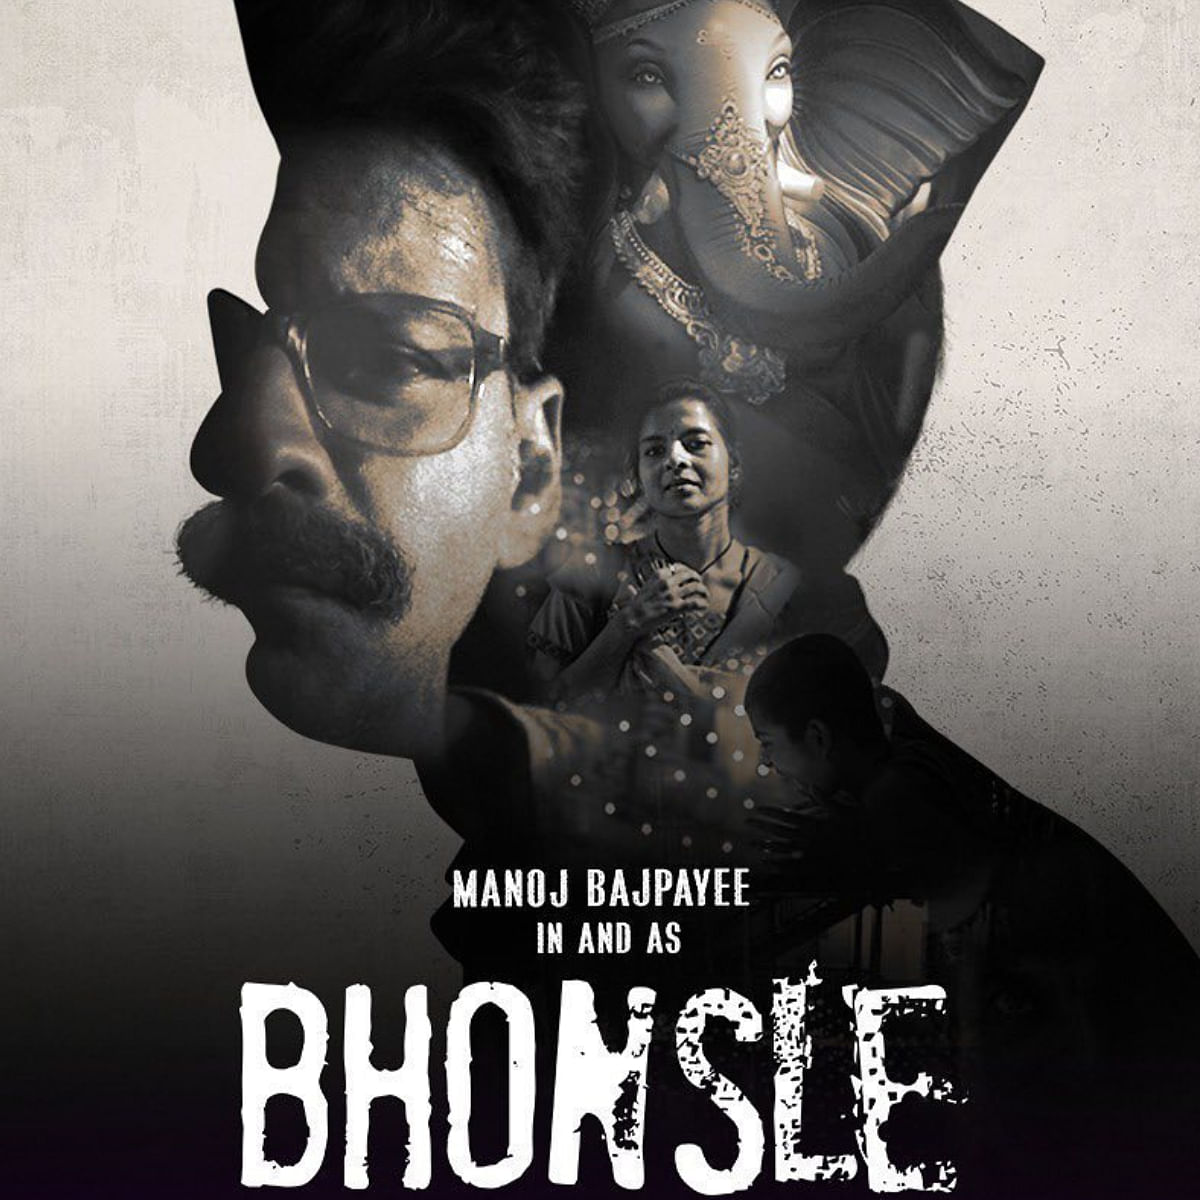 Bhonsle review: A flawed story of discrimination